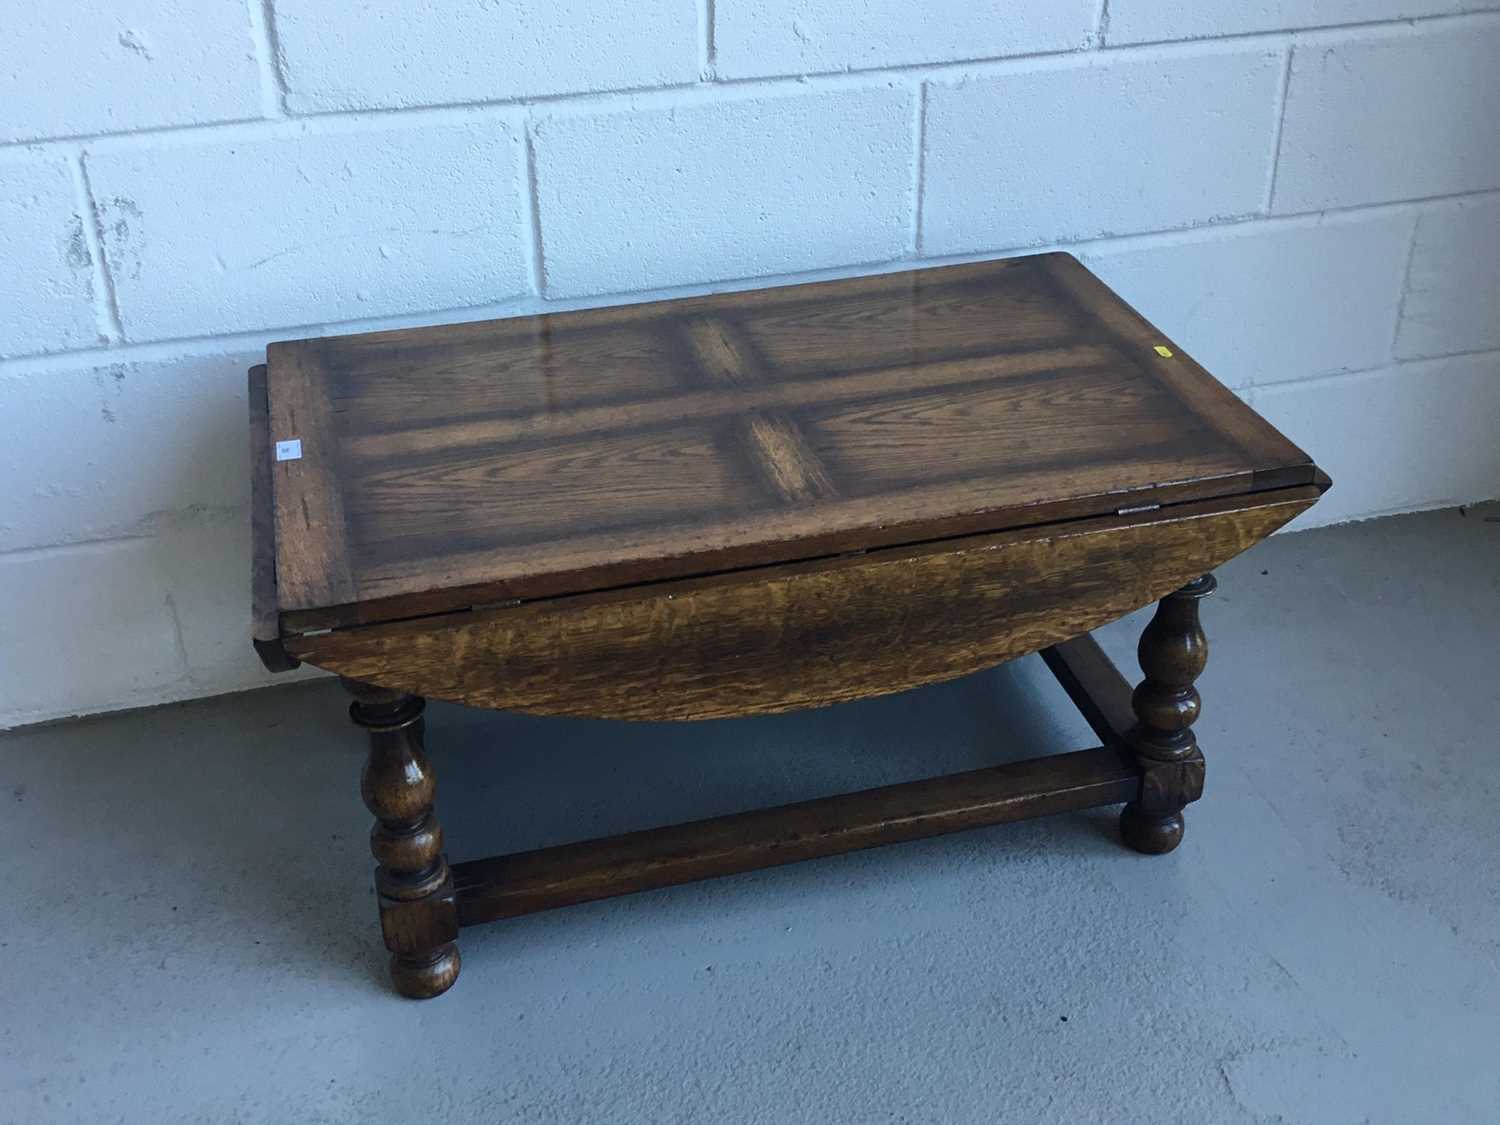 Lot 35 - Good Quality reproduction oak coffee table by Titchmarsh & Goodwin with drop leaves and turned baluster column legs joined by stretchers, 95cm in length, 48cm in height, 60cm in depth (leaves down)